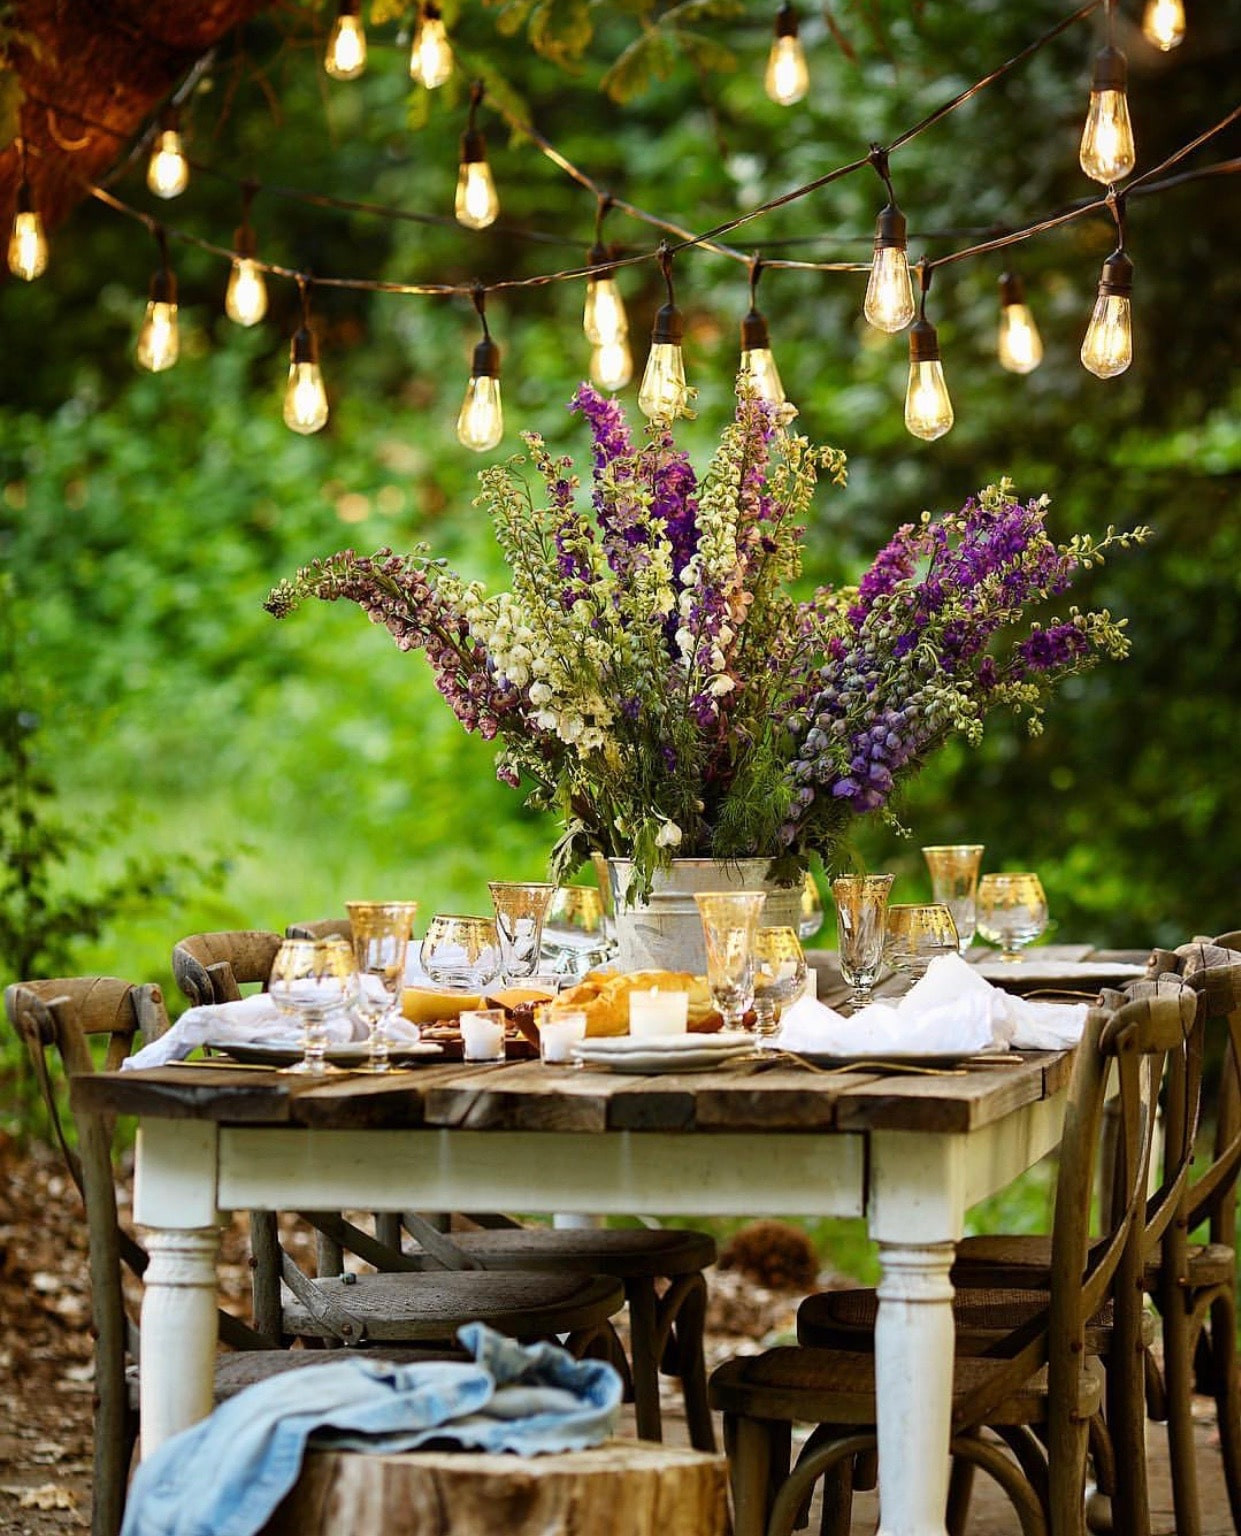 Outdoor Summer Birthday Party Ideas
 8 Charming outdoor party decoration ideas